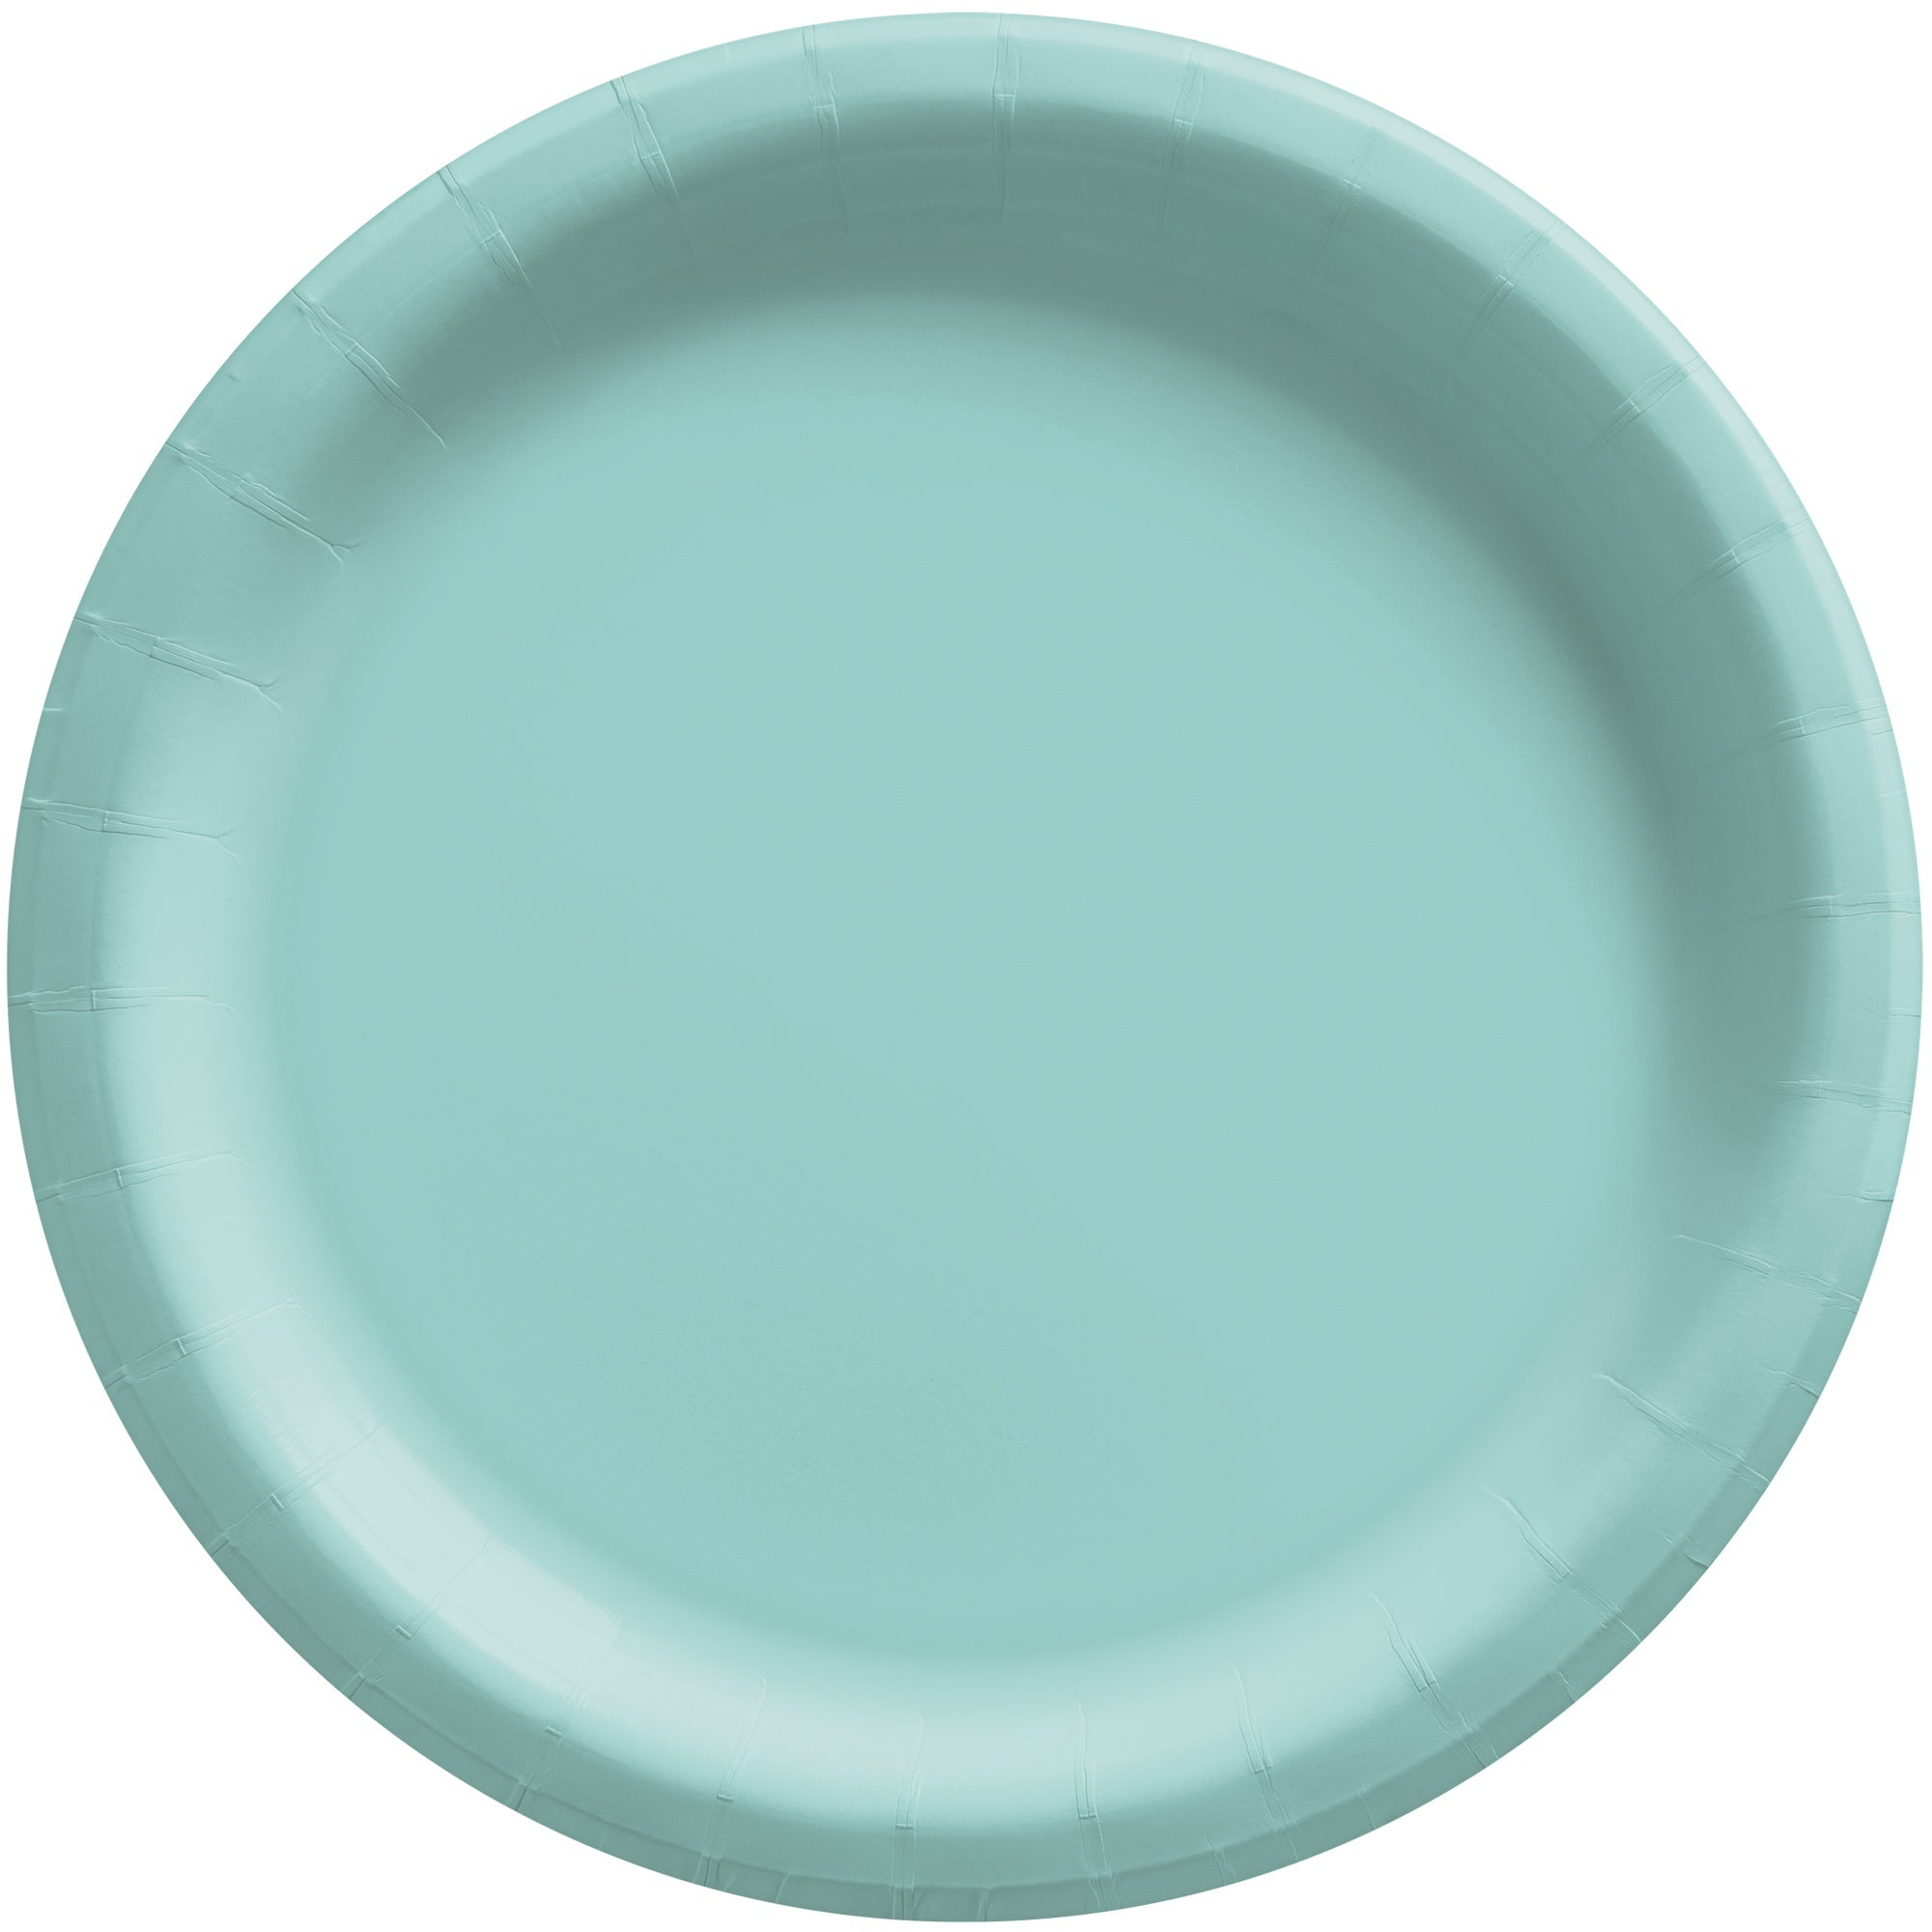 Round Paper Plates  Robin Egg BLue  20 Pcs  8.5in